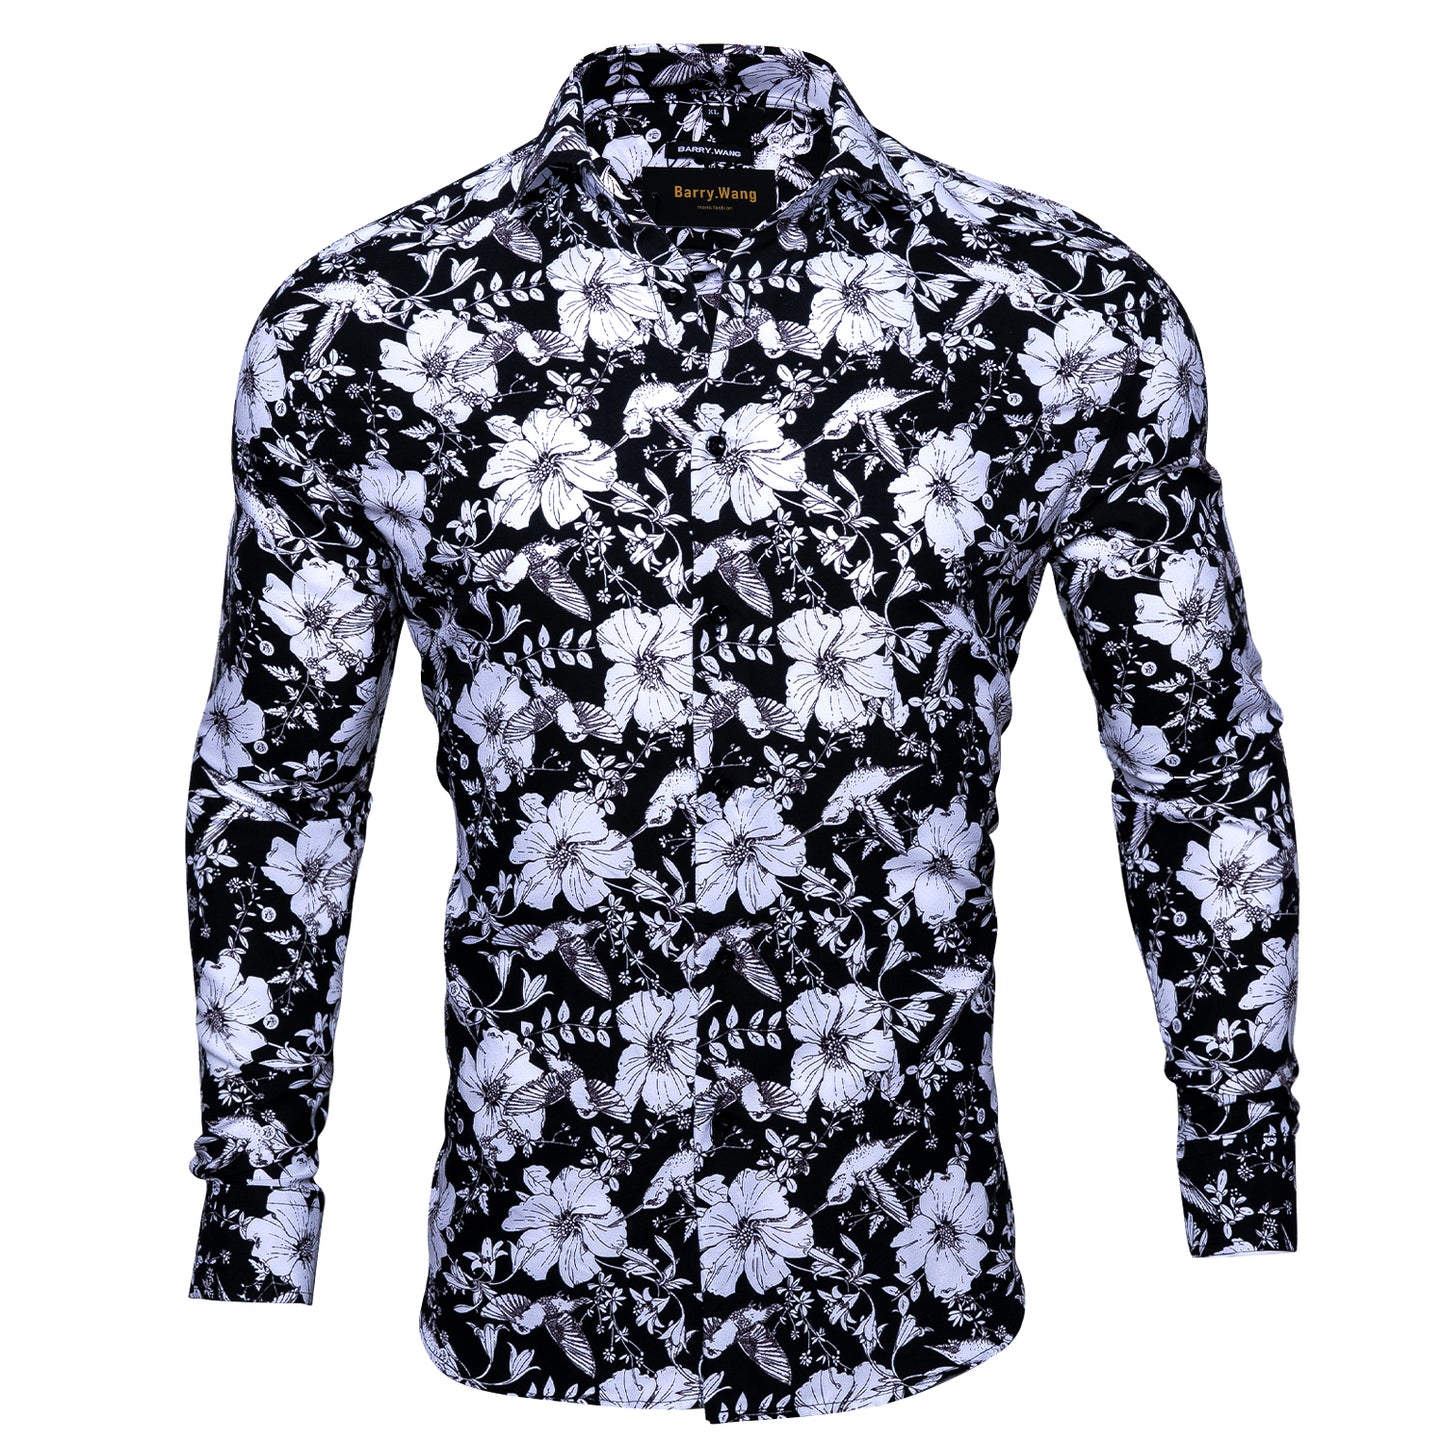 Novelty Printed Shirt - Buttercup White